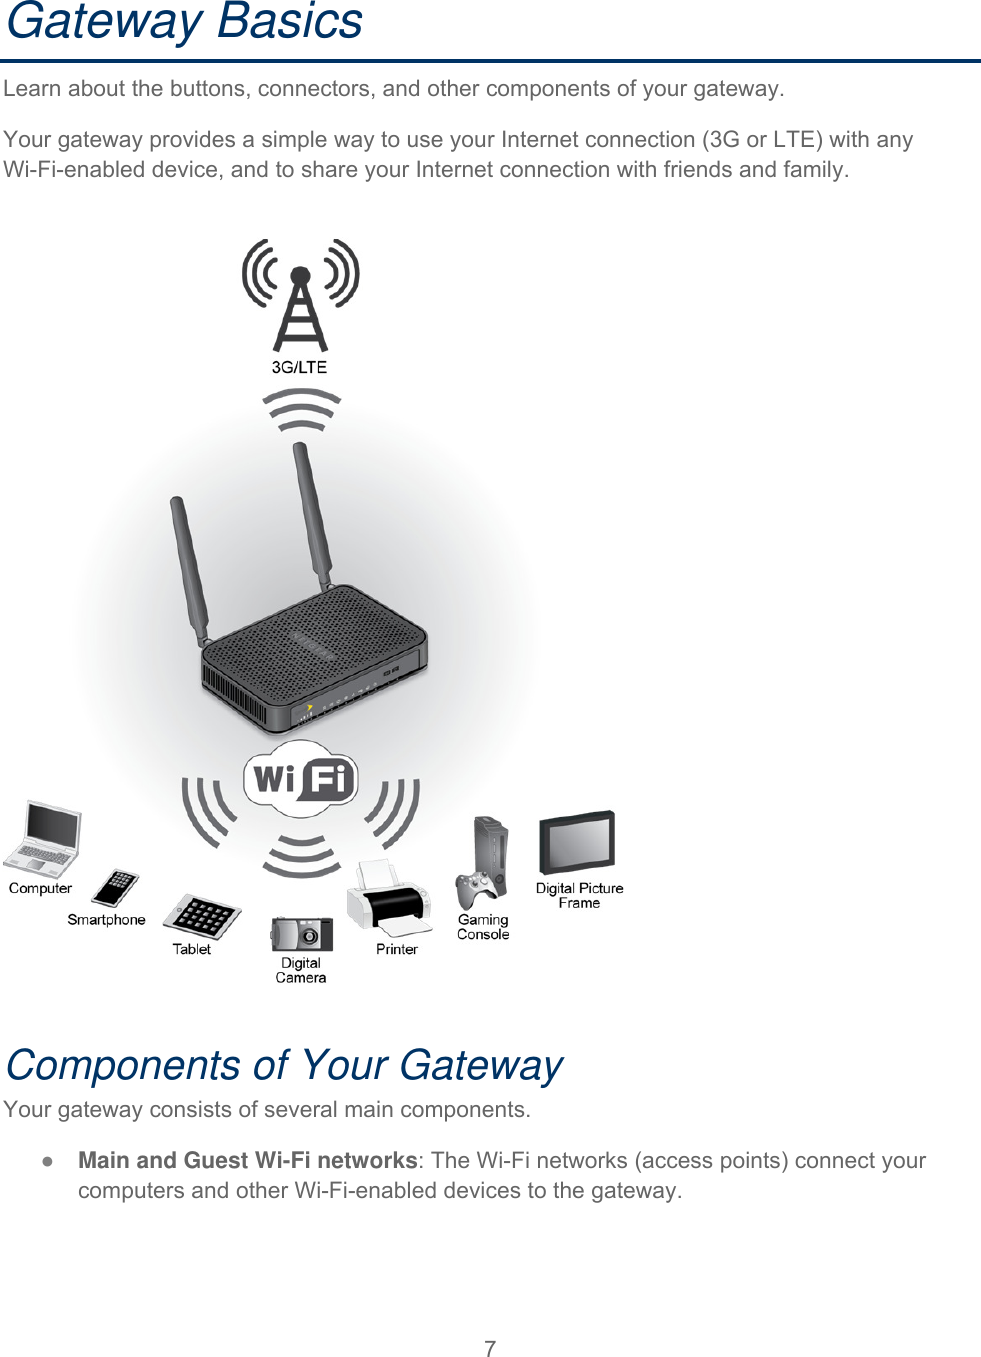  7  Gateway Basics Learn about the buttons, connectors, and other components of your gateway. Your gateway provides a simple way to use your Internet connection (3G or LTE) with any Wi-Fi-enabled device, and to share your Internet connection with friends and family.    Components of Your Gateway Your gateway consists of several main components. ● Main and Guest Wi-Fi networks: The Wi-Fi networks (access points) connect your computers and other Wi-Fi-enabled devices to the gateway. 